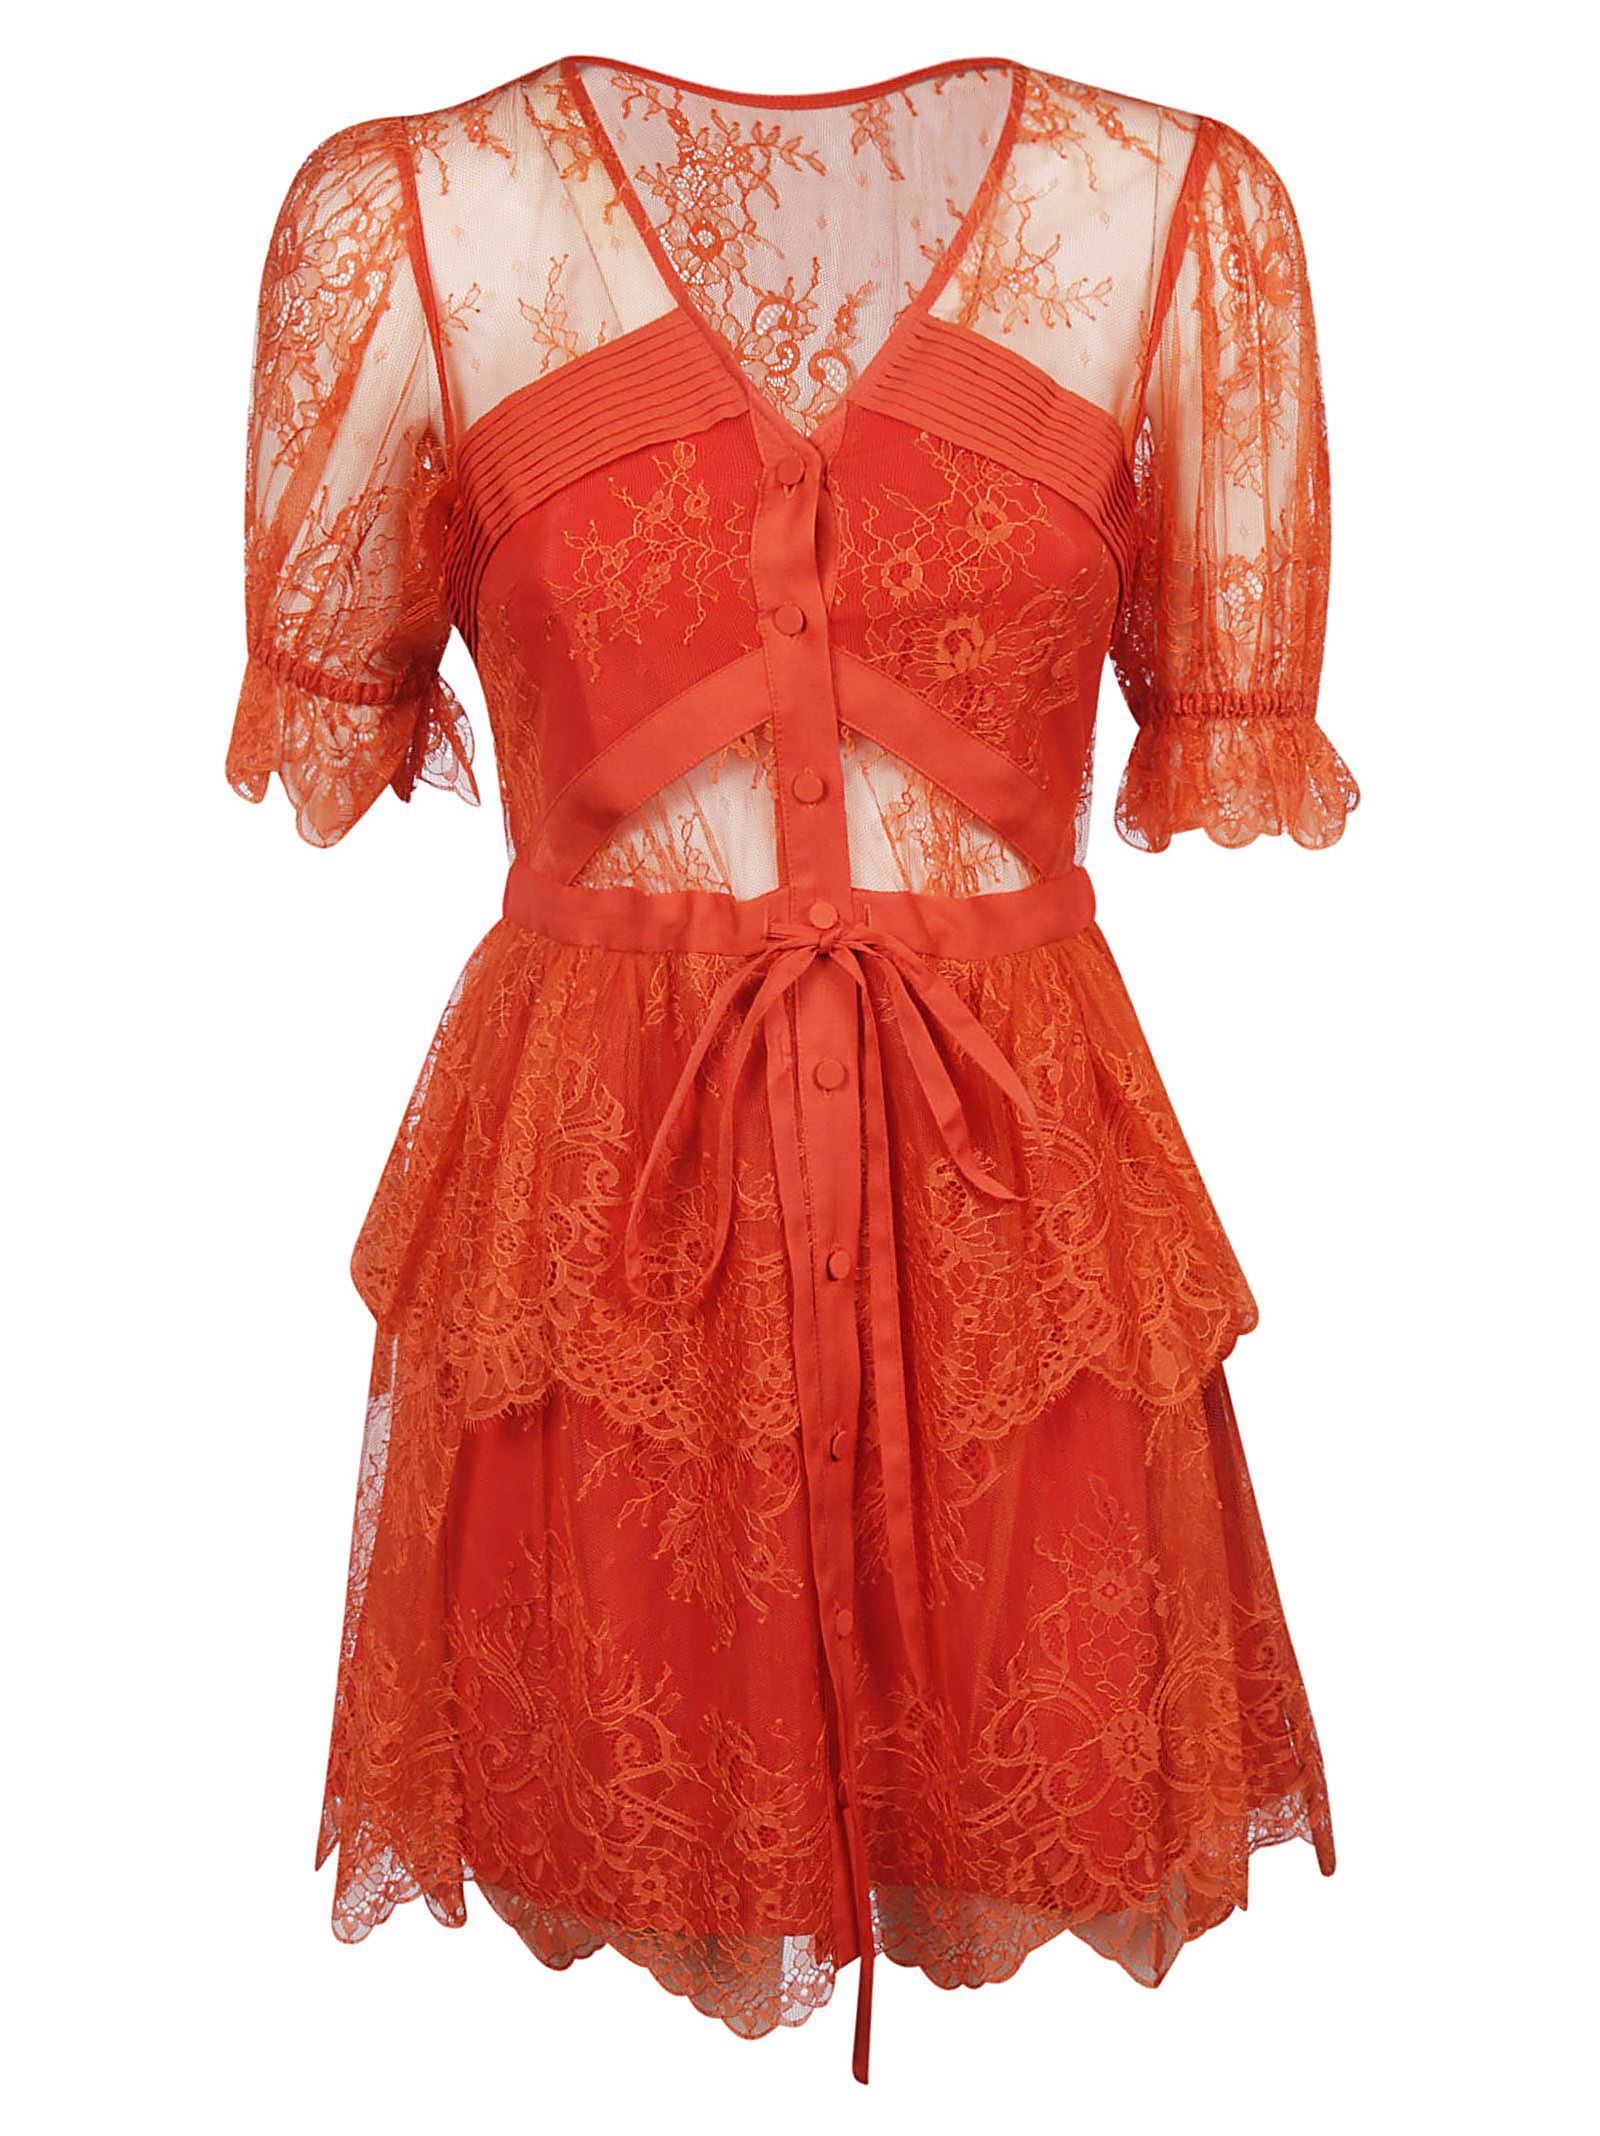 pearson red lace short sleeve dress